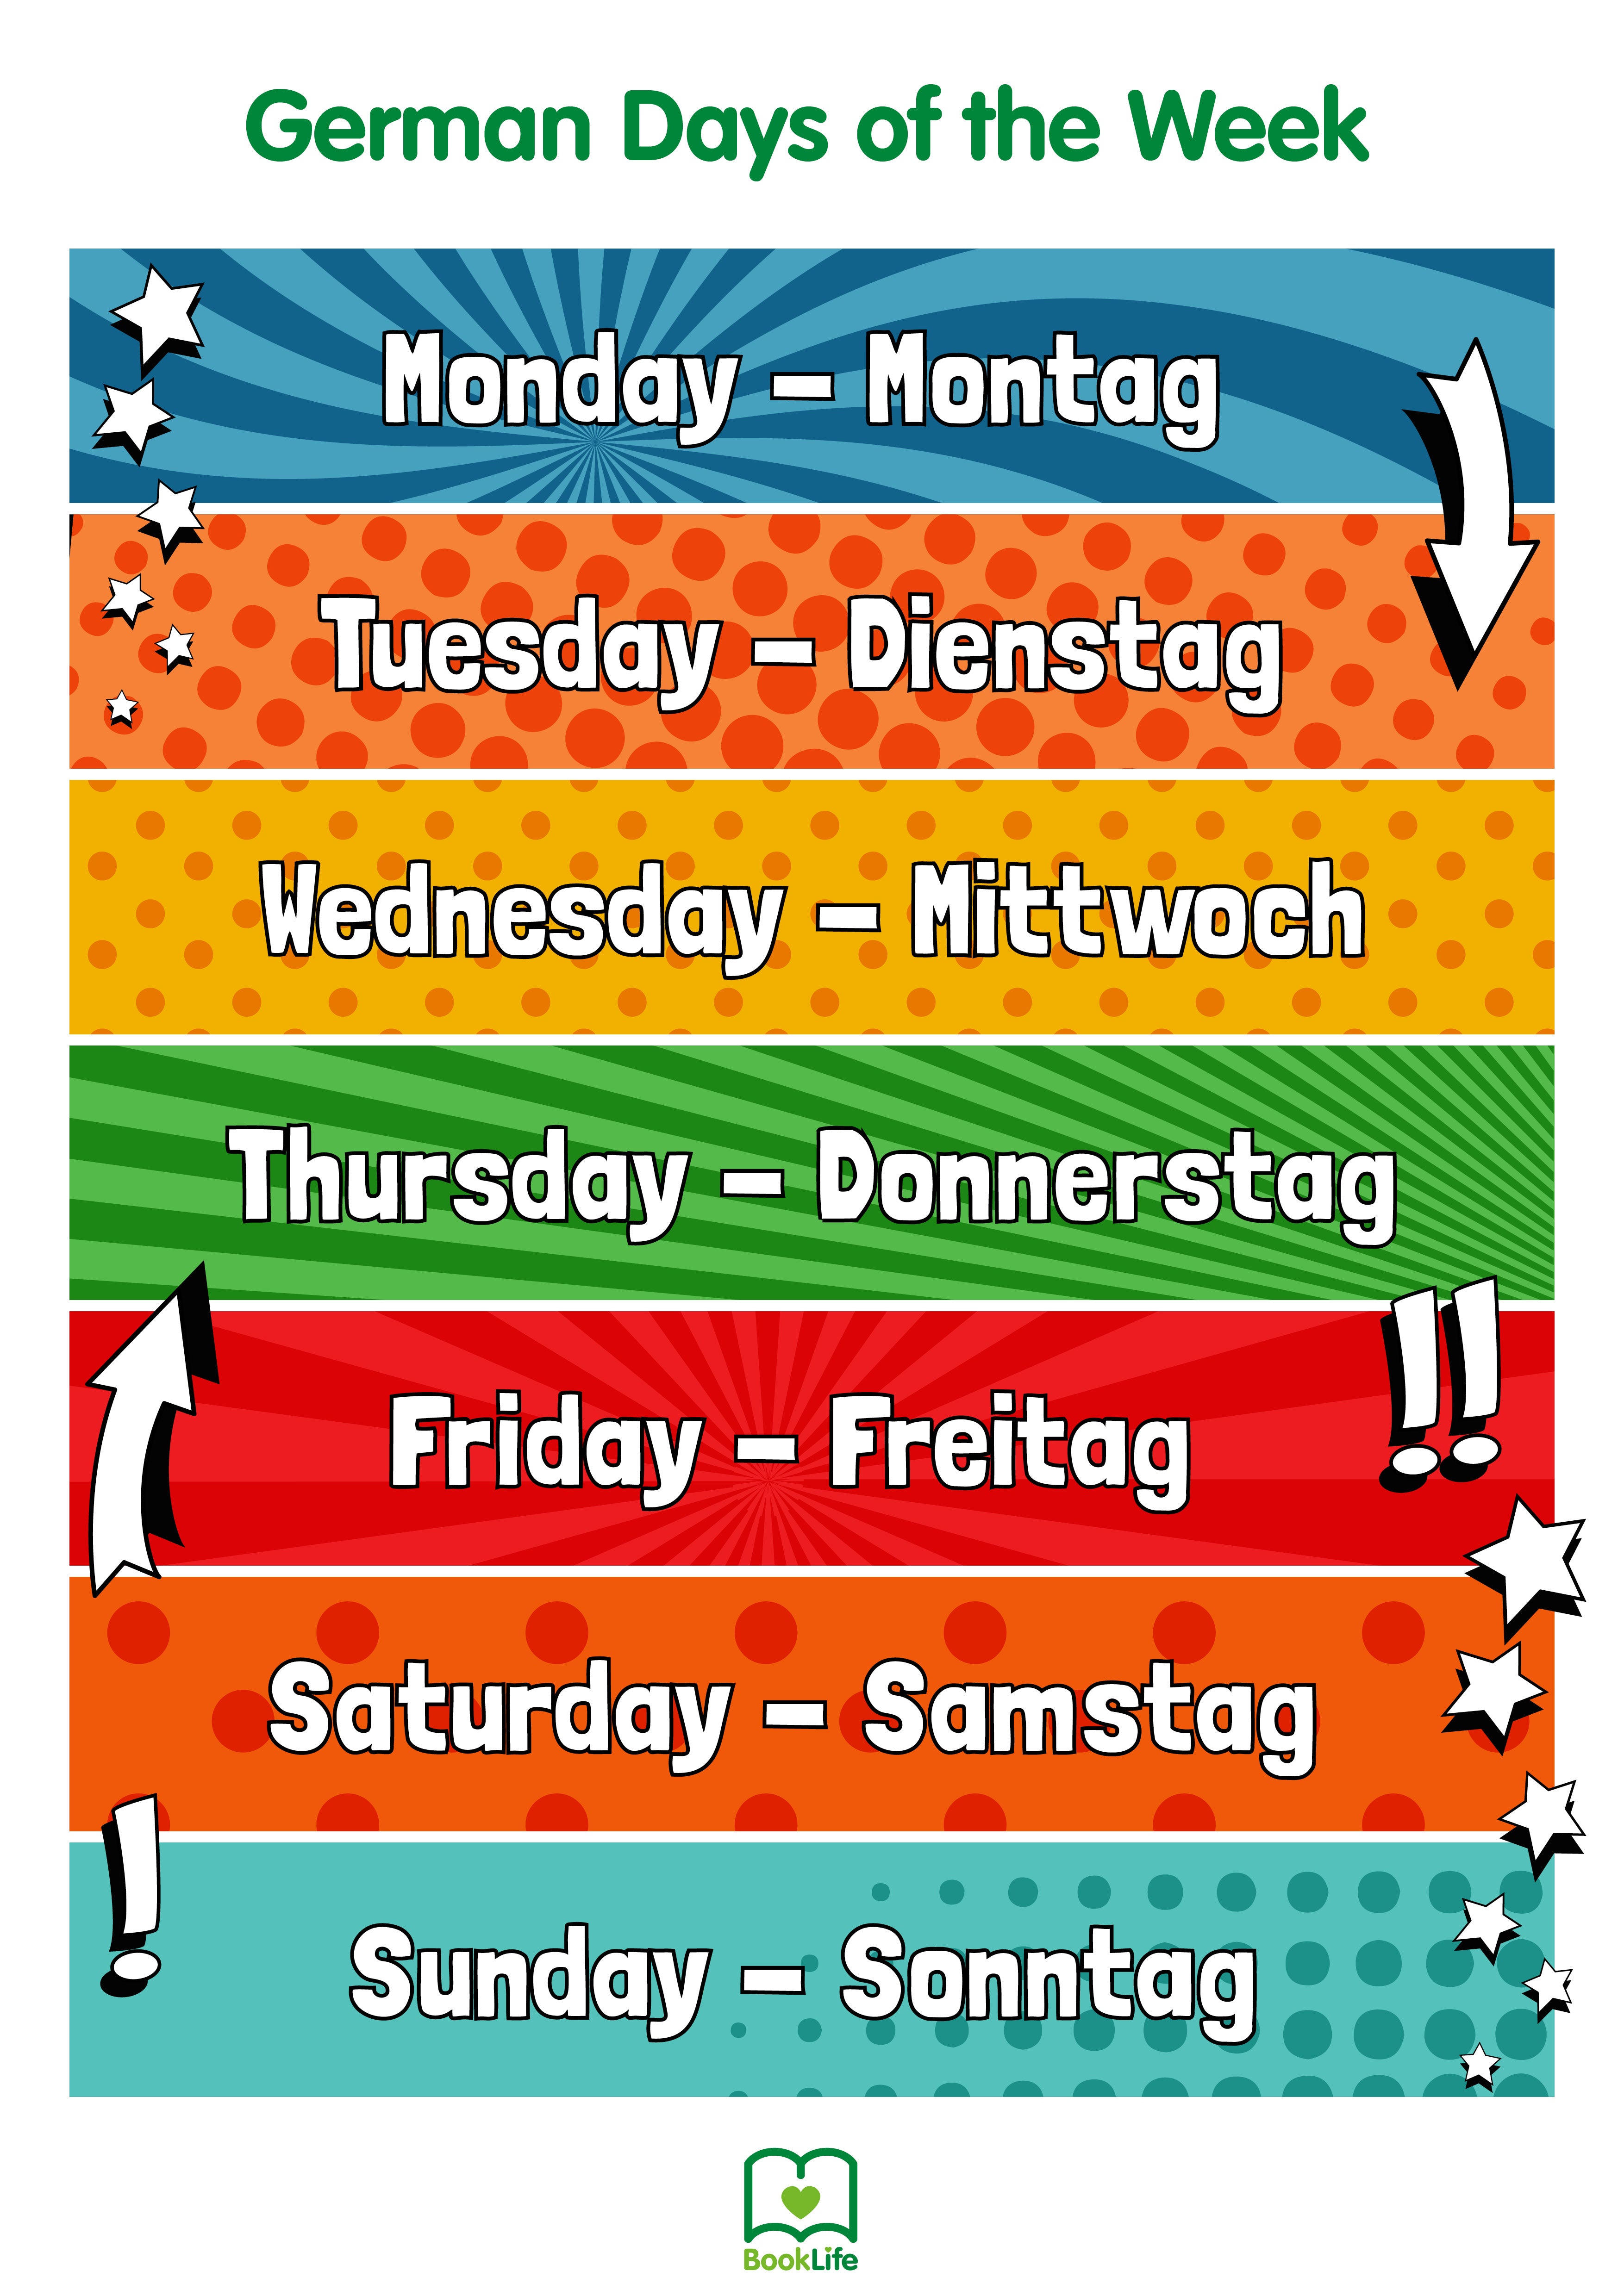 Free German Days of the Week Poster by BookLife